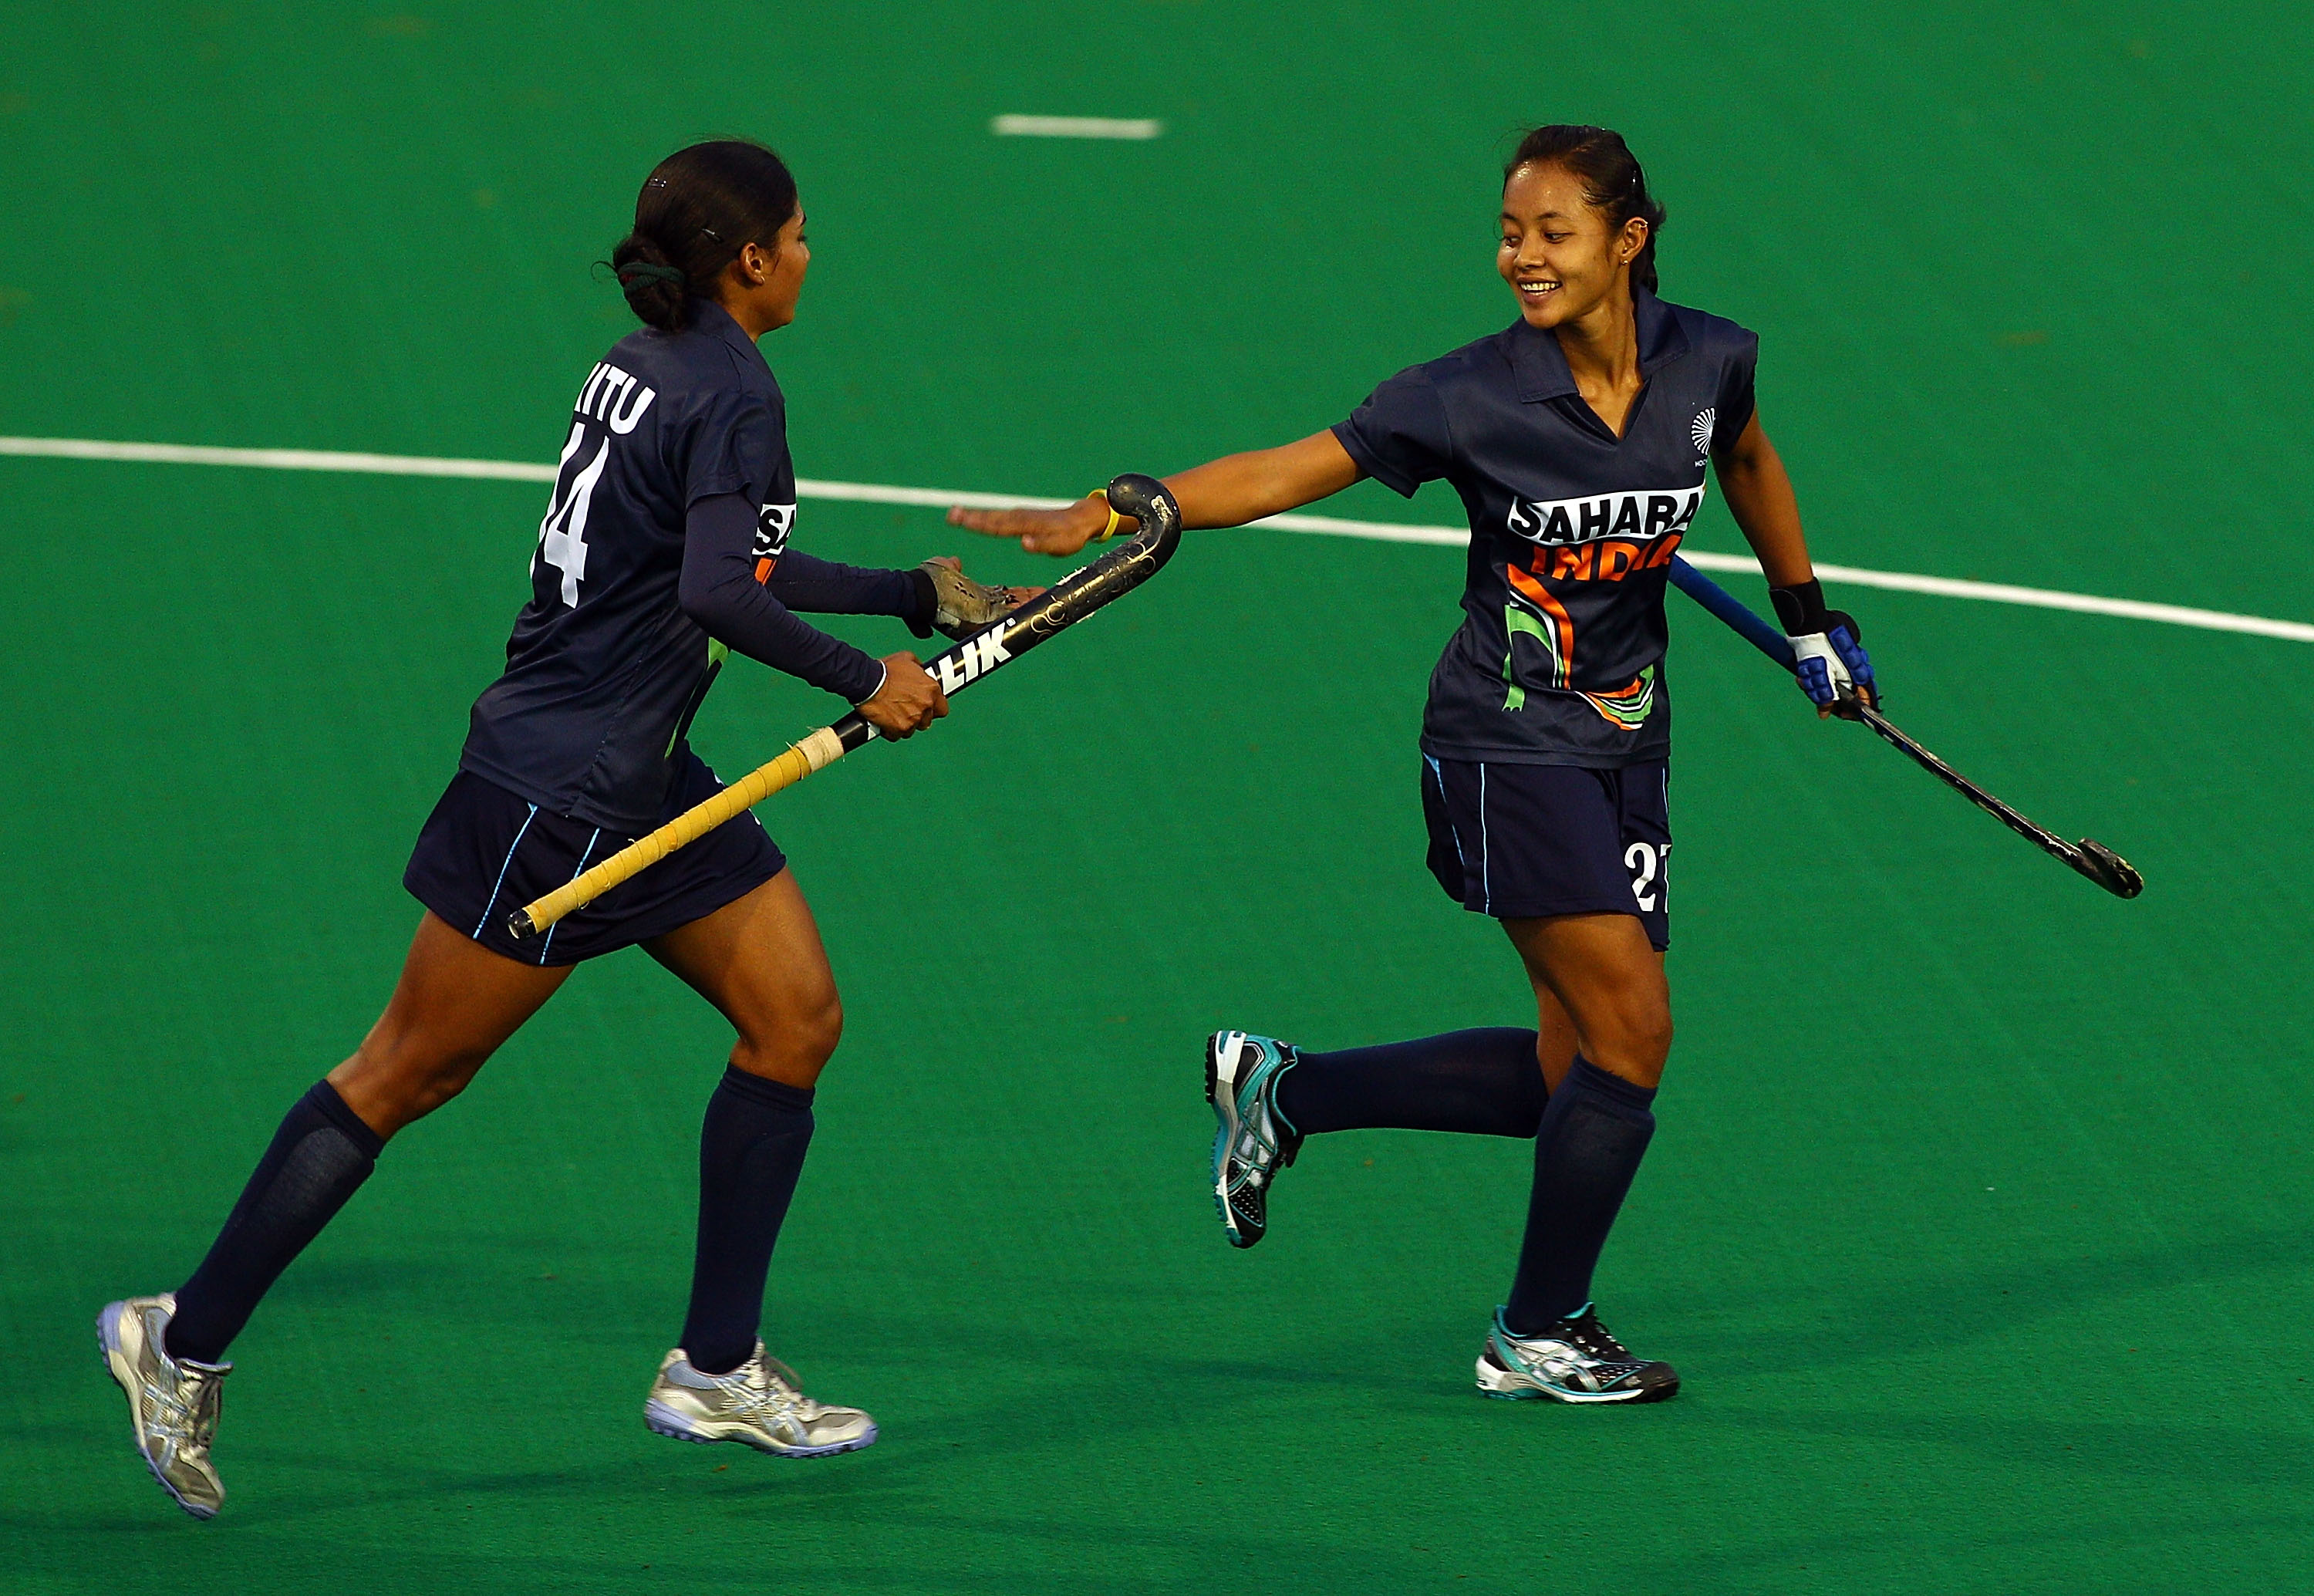 [Exclusive] India women's hockey skipper Sushila Chanu opens up about captaincy and the Olympics